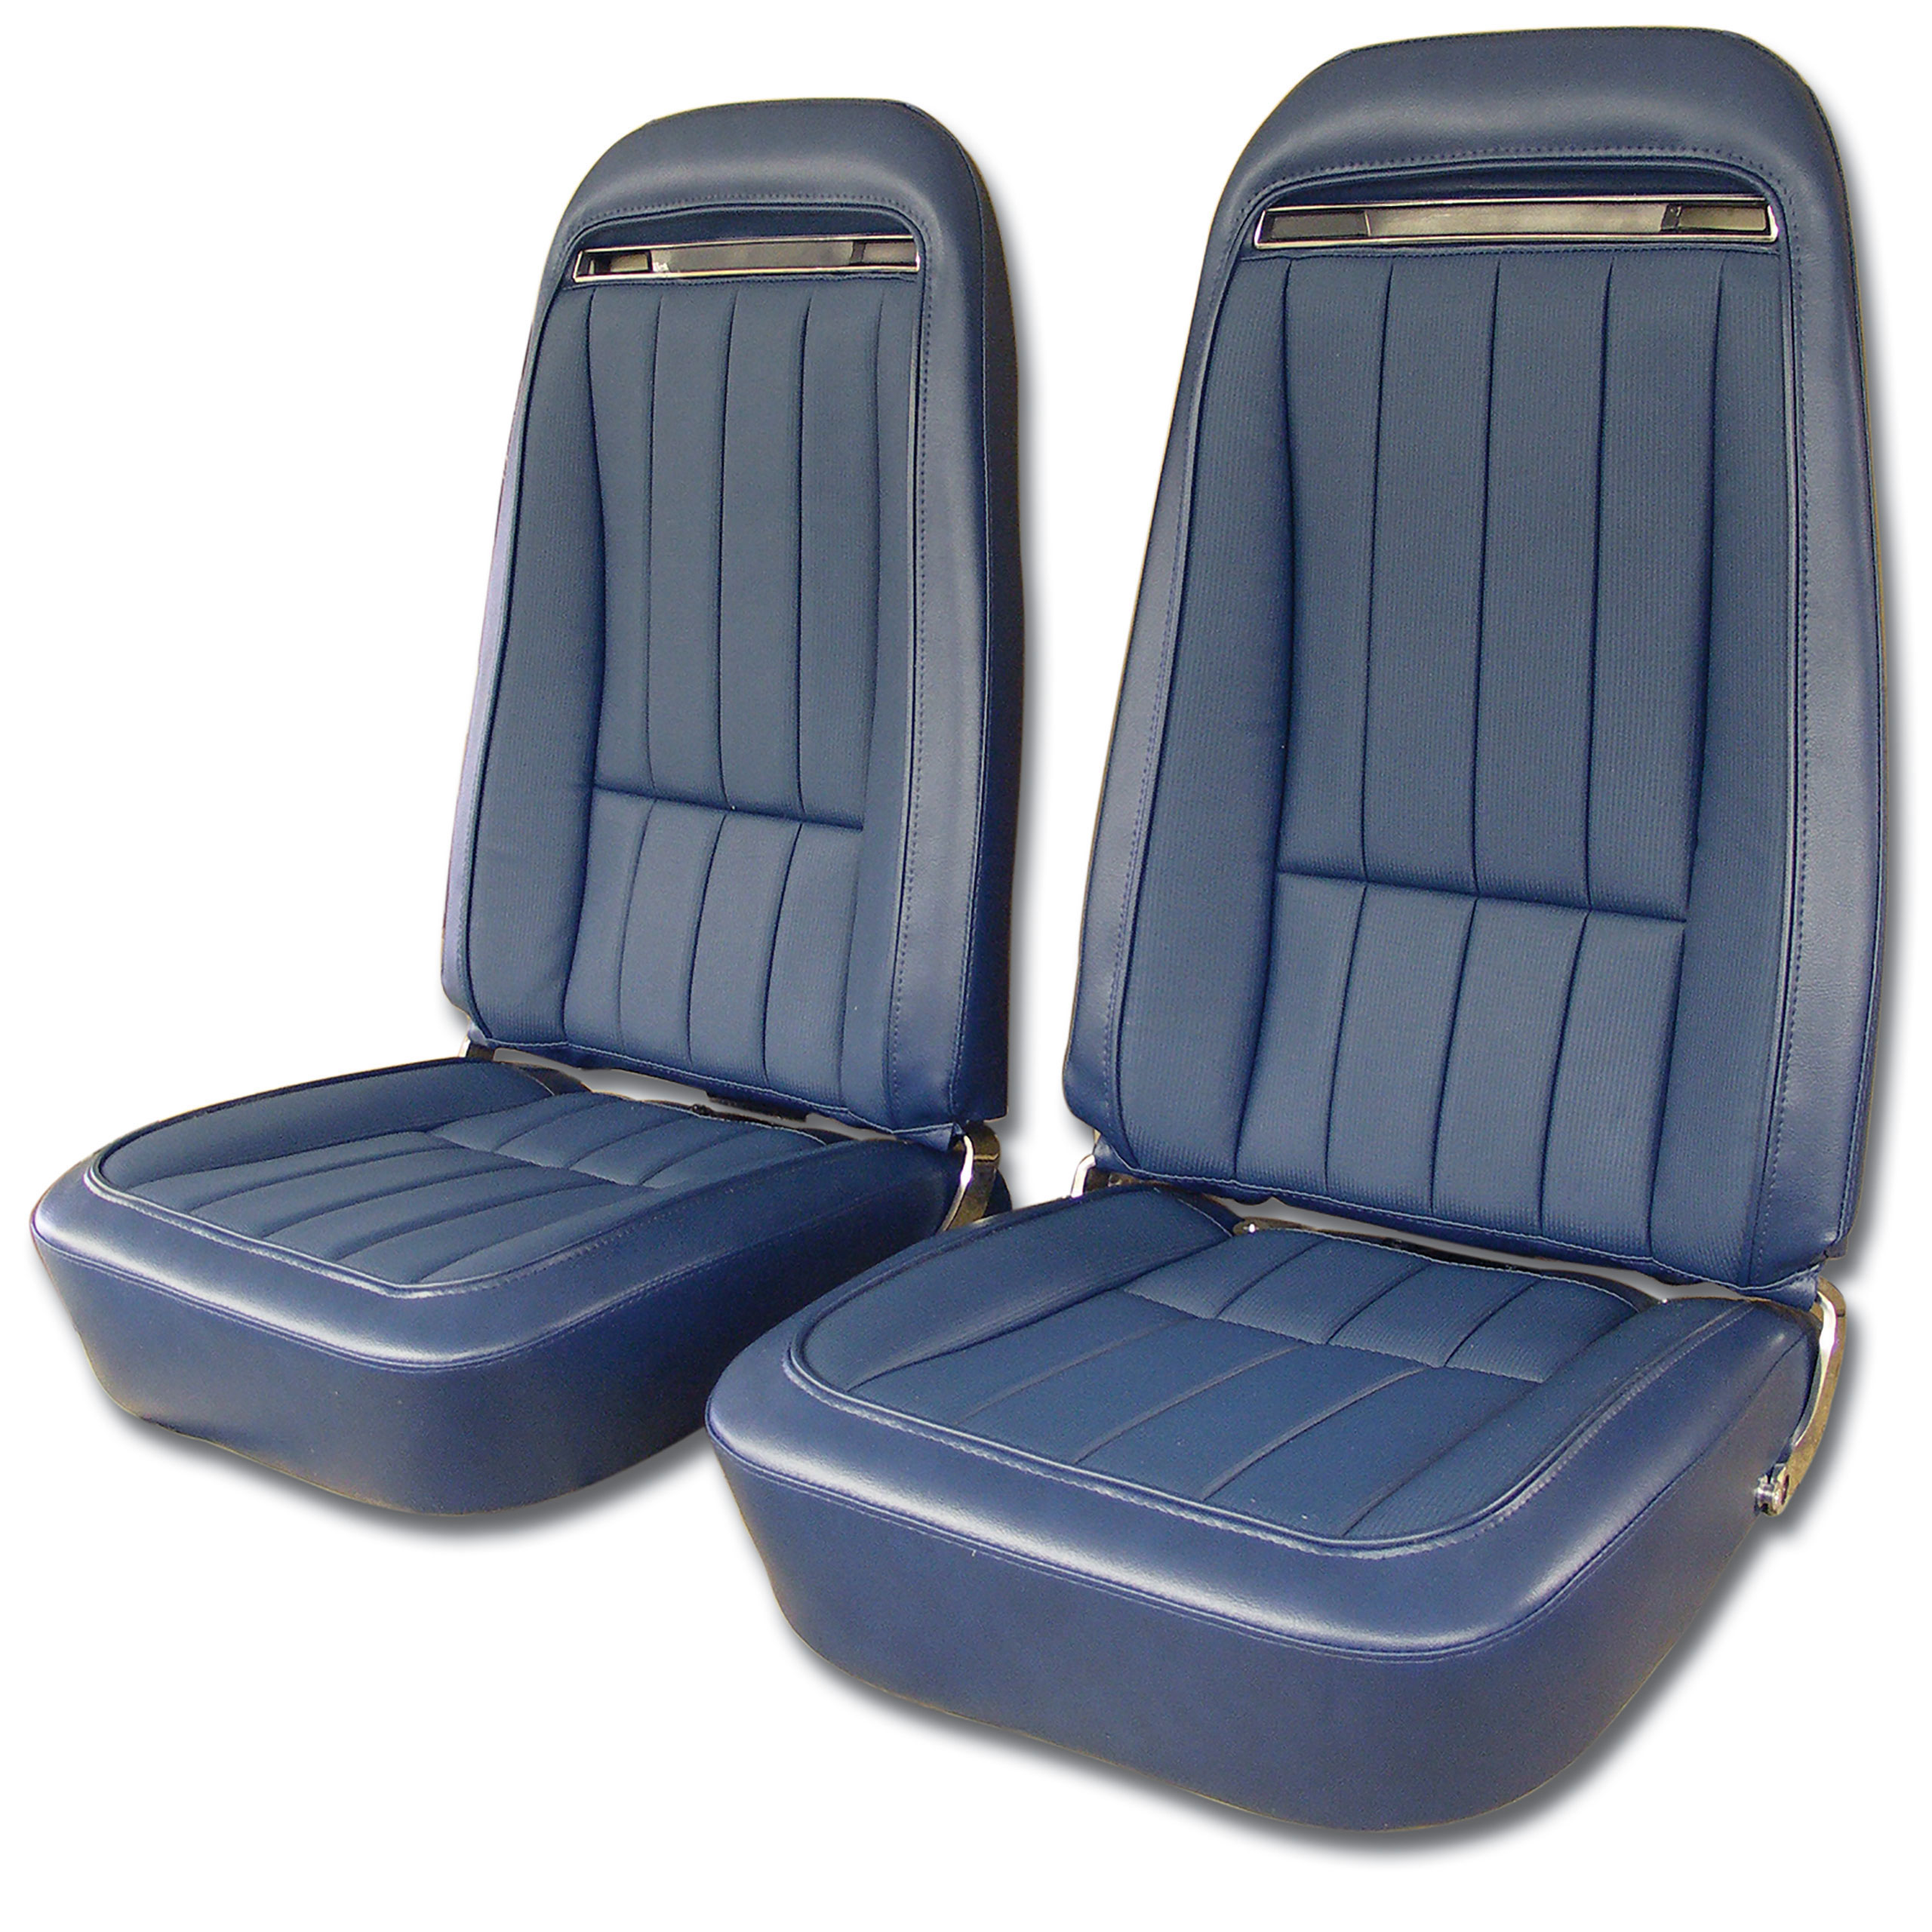 1971 C3 Corvette Mounted Seats Royal Blue "Leather-Like" Vinyl With Shoulder Harness